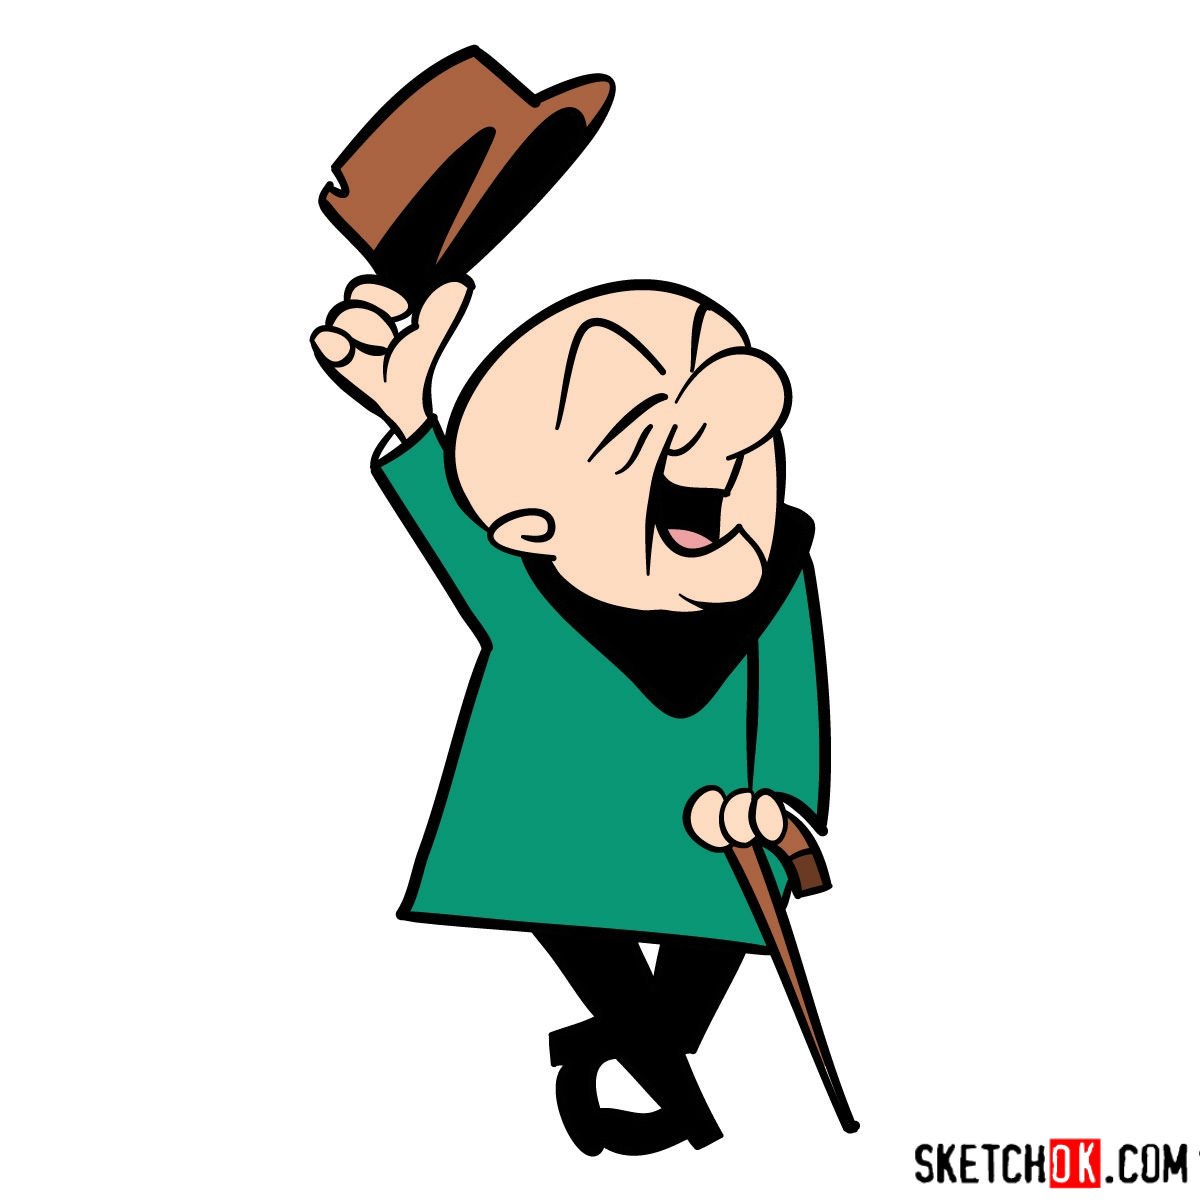 How to draw Mr. Magoo